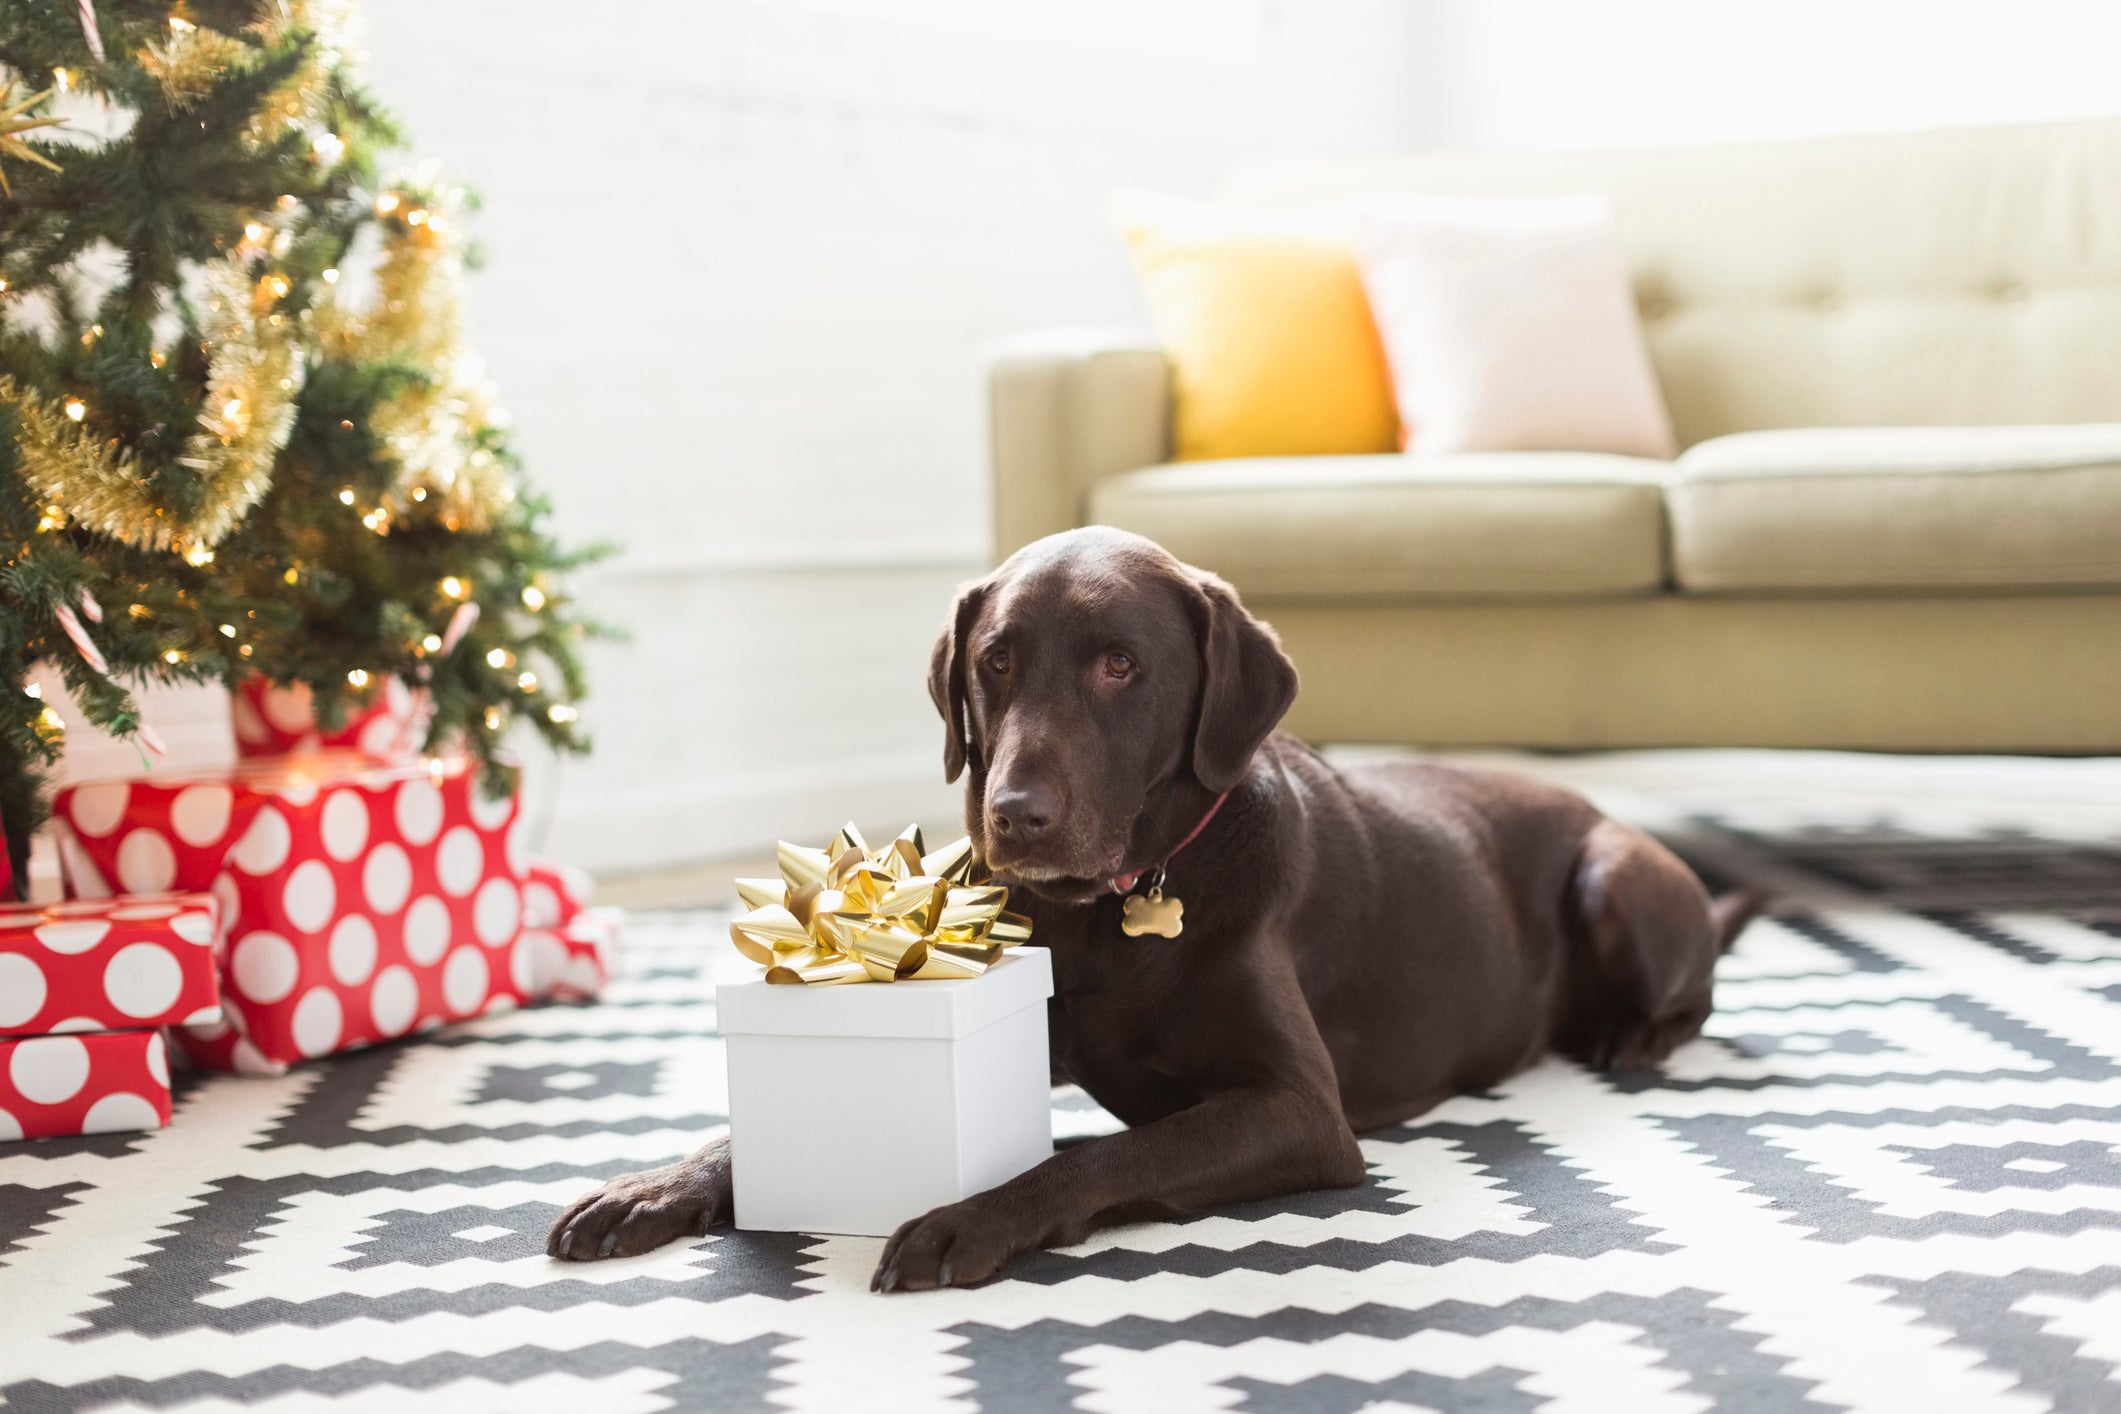 Drink up these perfect presents for your pet this Christmas! 🐶🎄 # WeatherTech #giftideas #petgifts #doggifts #catgifts